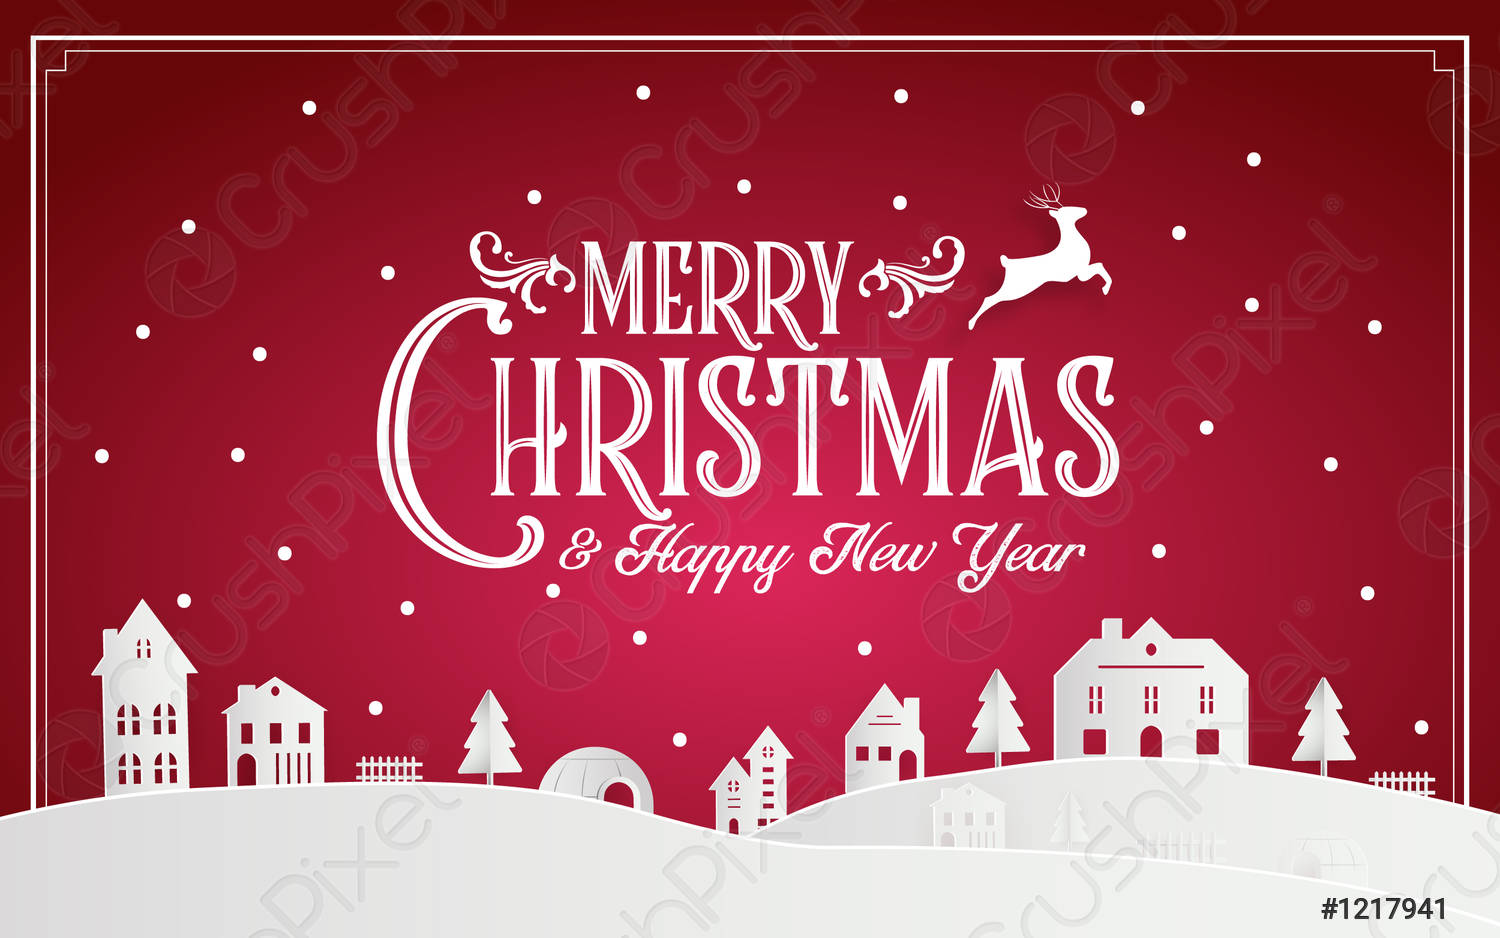 Detail Merry Christmas And Happy New Year Wallpaper Nomer 21